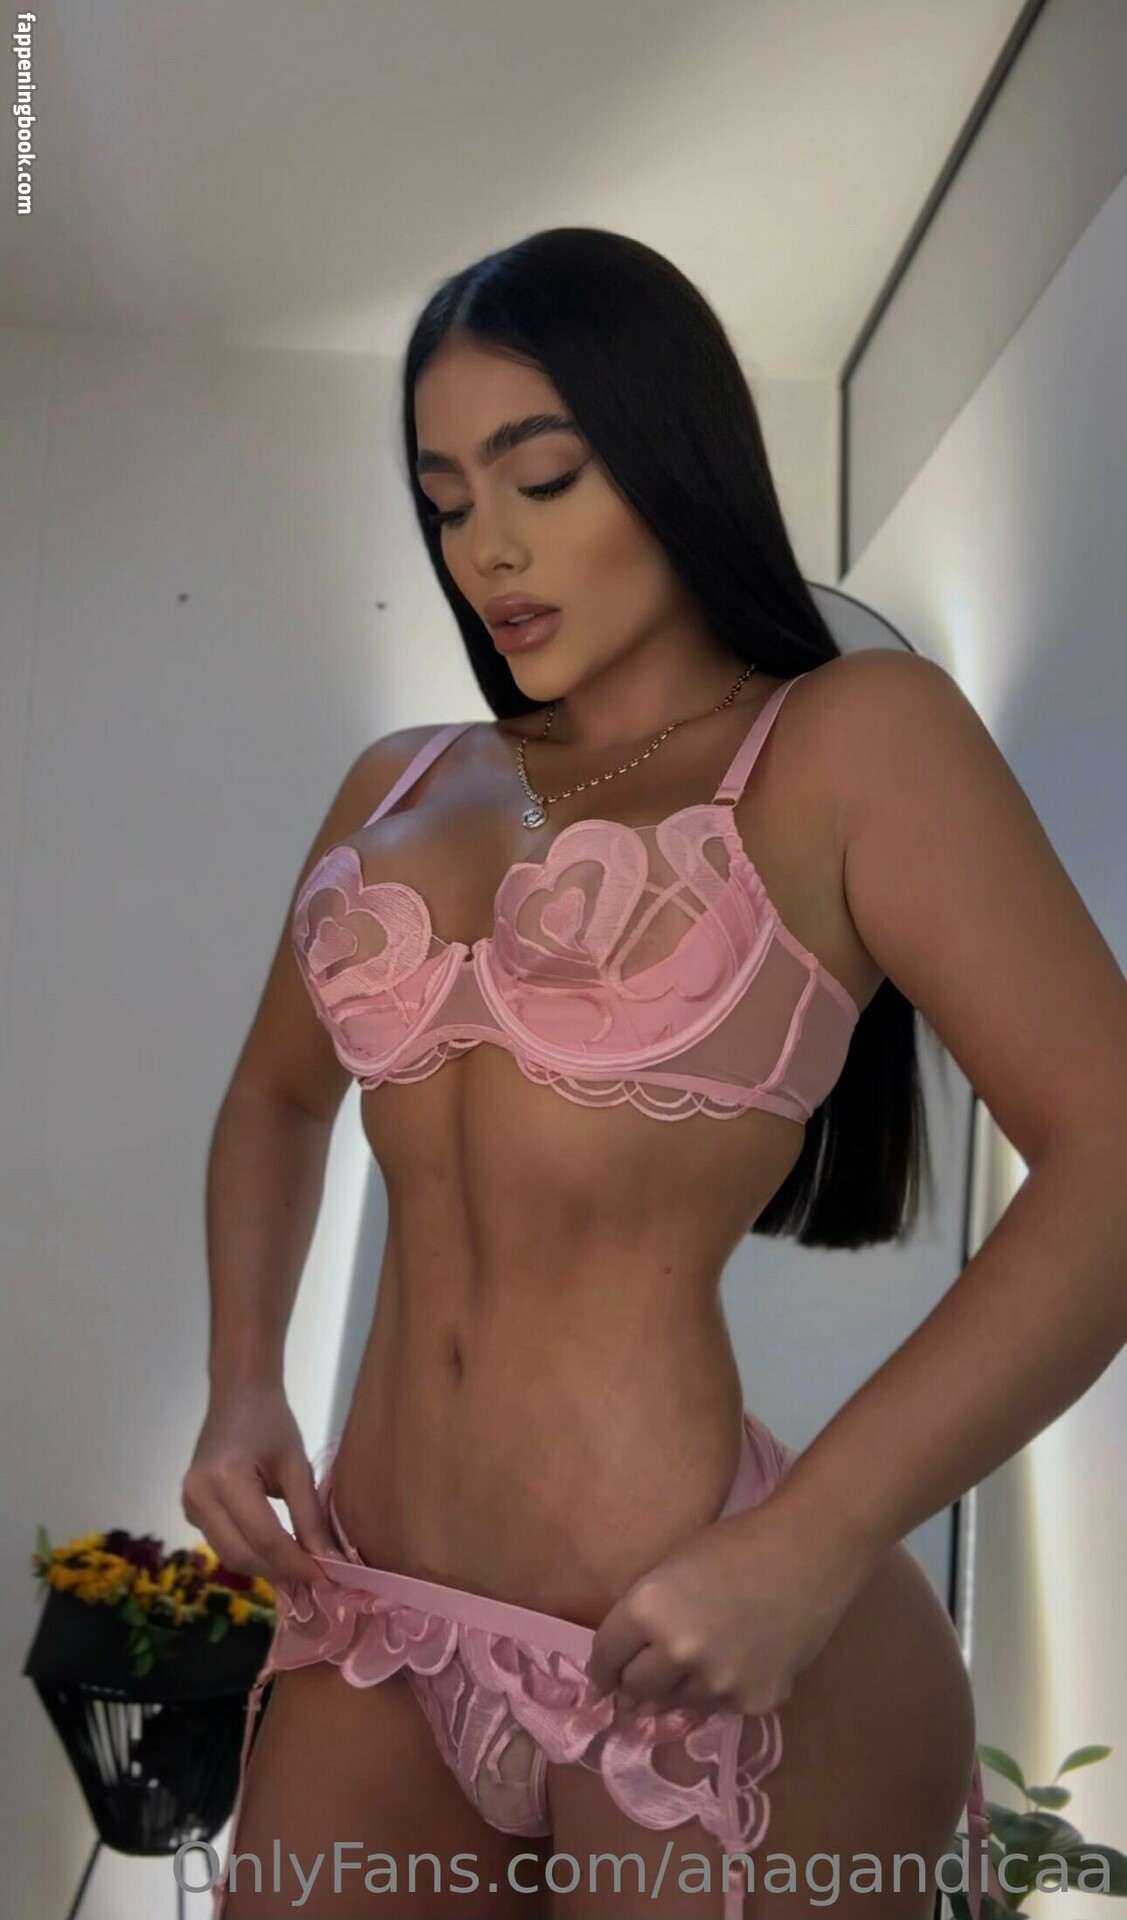 Ana gandica only fans